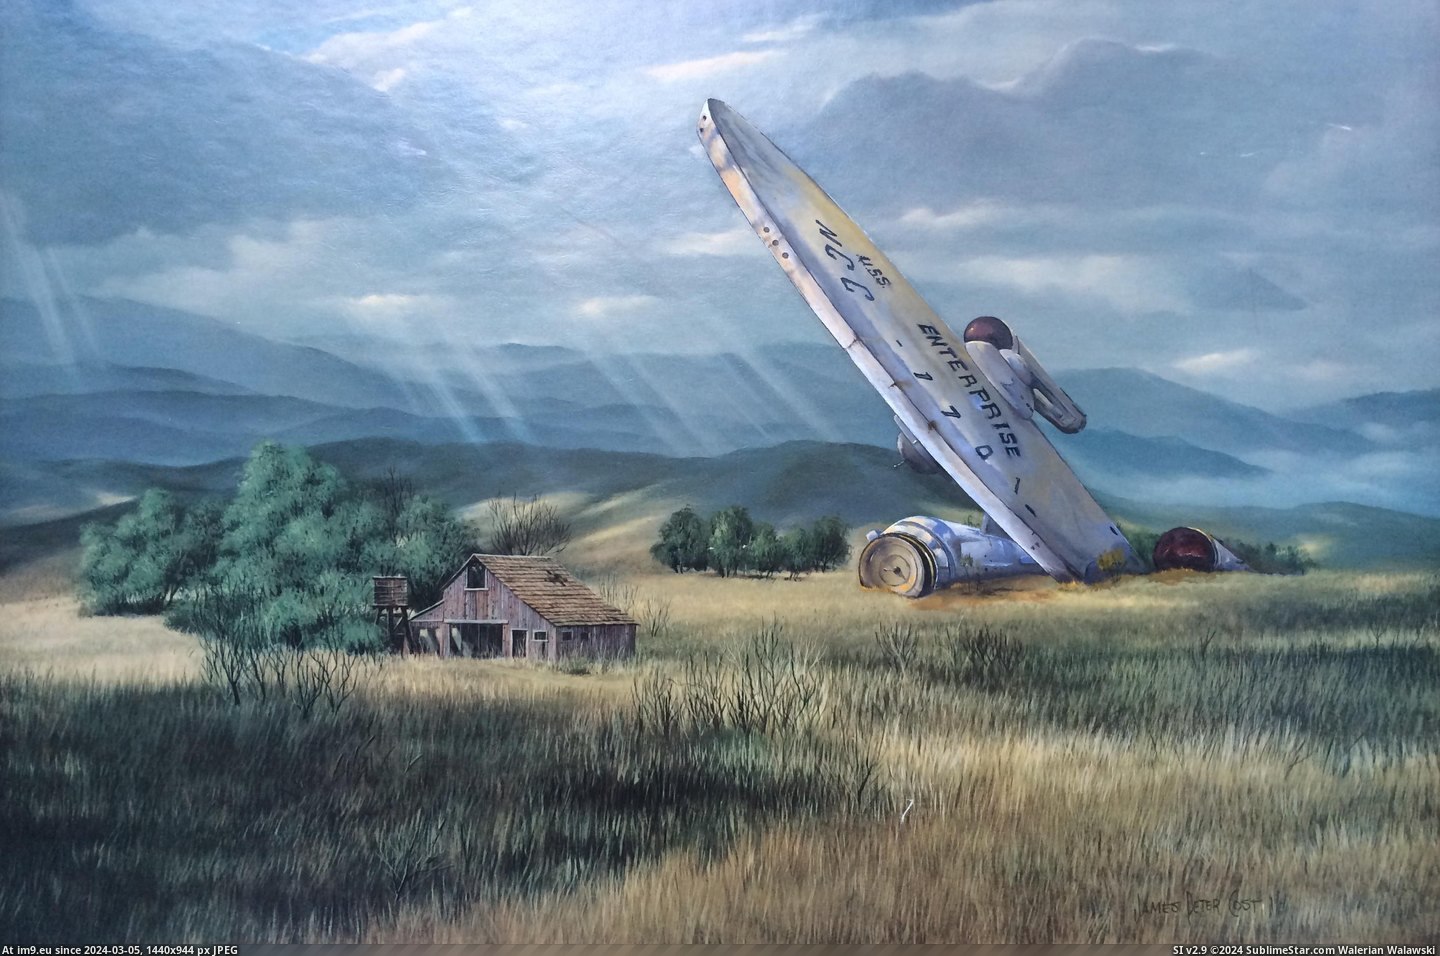 #Old #Painting #Hope #Print #Enterprise #Finished #Enjoys #Thrift [Pics] I just finished painting the Enterprise into this old thrift print. Hope reddit enjoys 'First Contact' Pic. (Obraz z album My r/PICS favs))